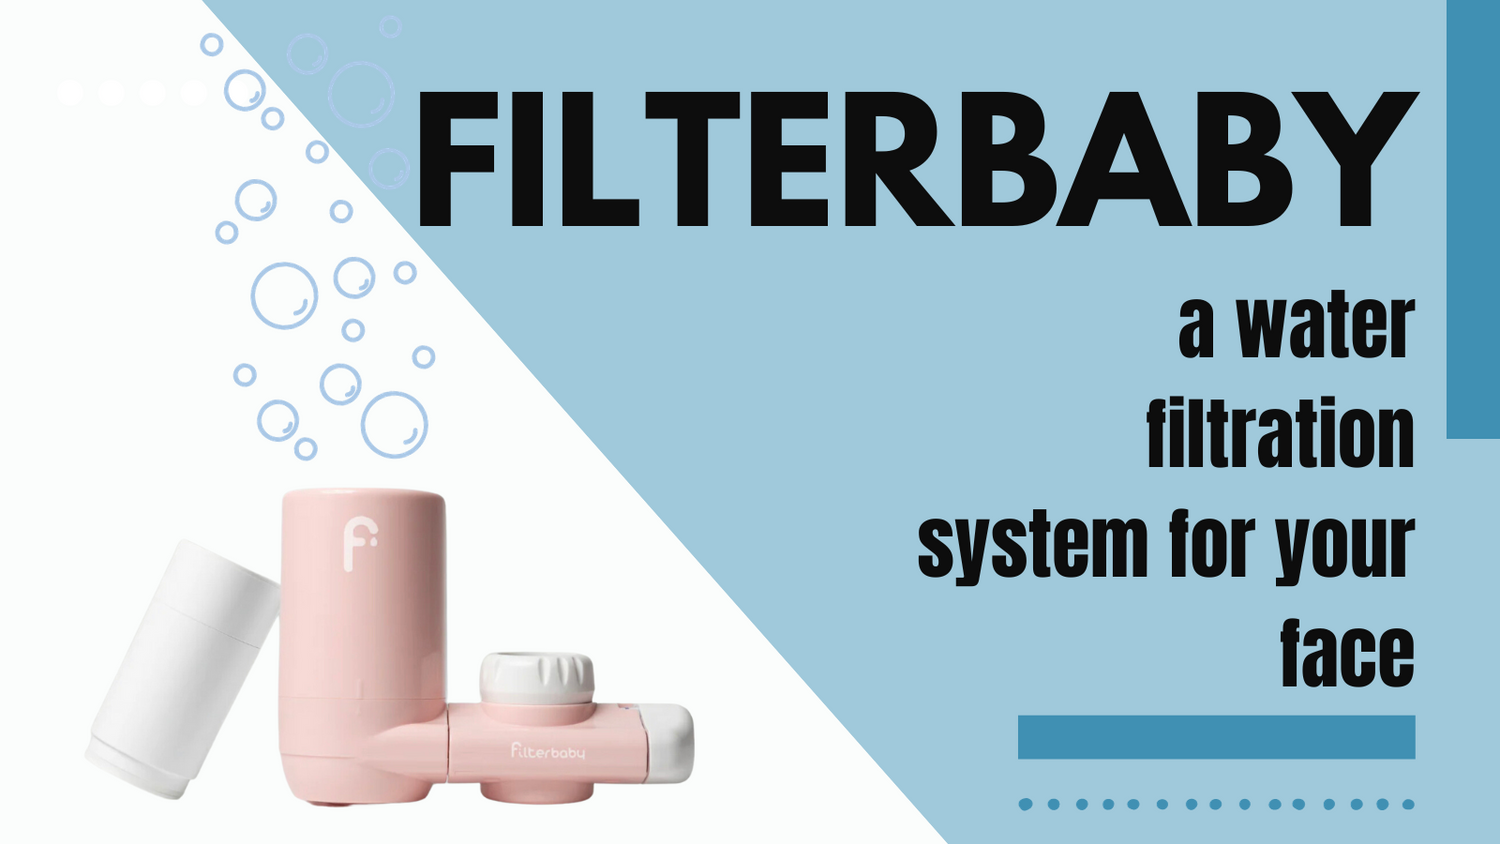 FilterBaby is a H20 filtration system that purifies water so you can wash your face with the purist water possible at Heaven on earth